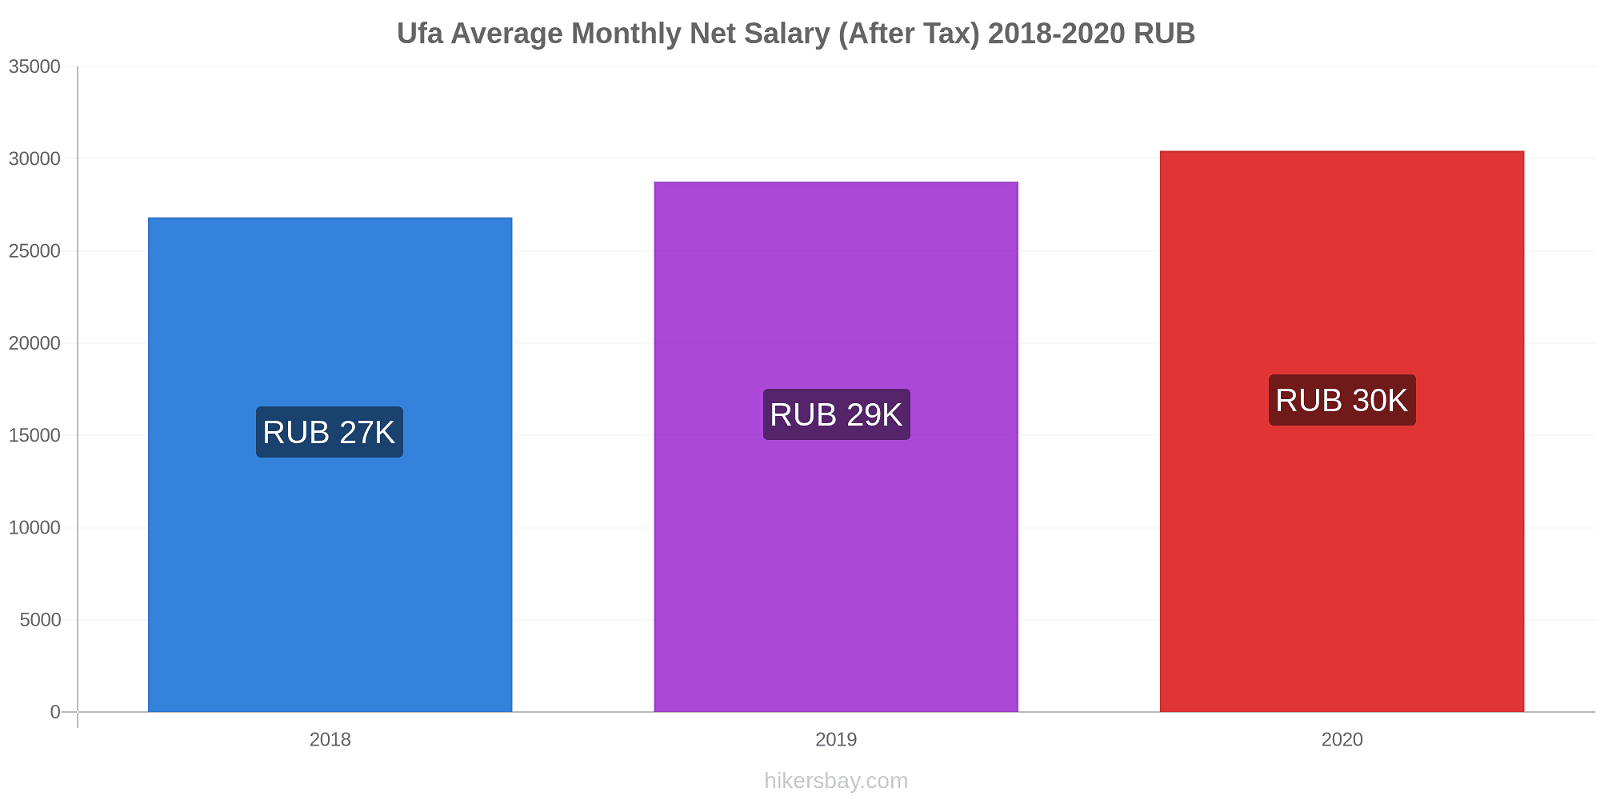 Ufa price changes Average Monthly Net Salary (After Tax) hikersbay.com